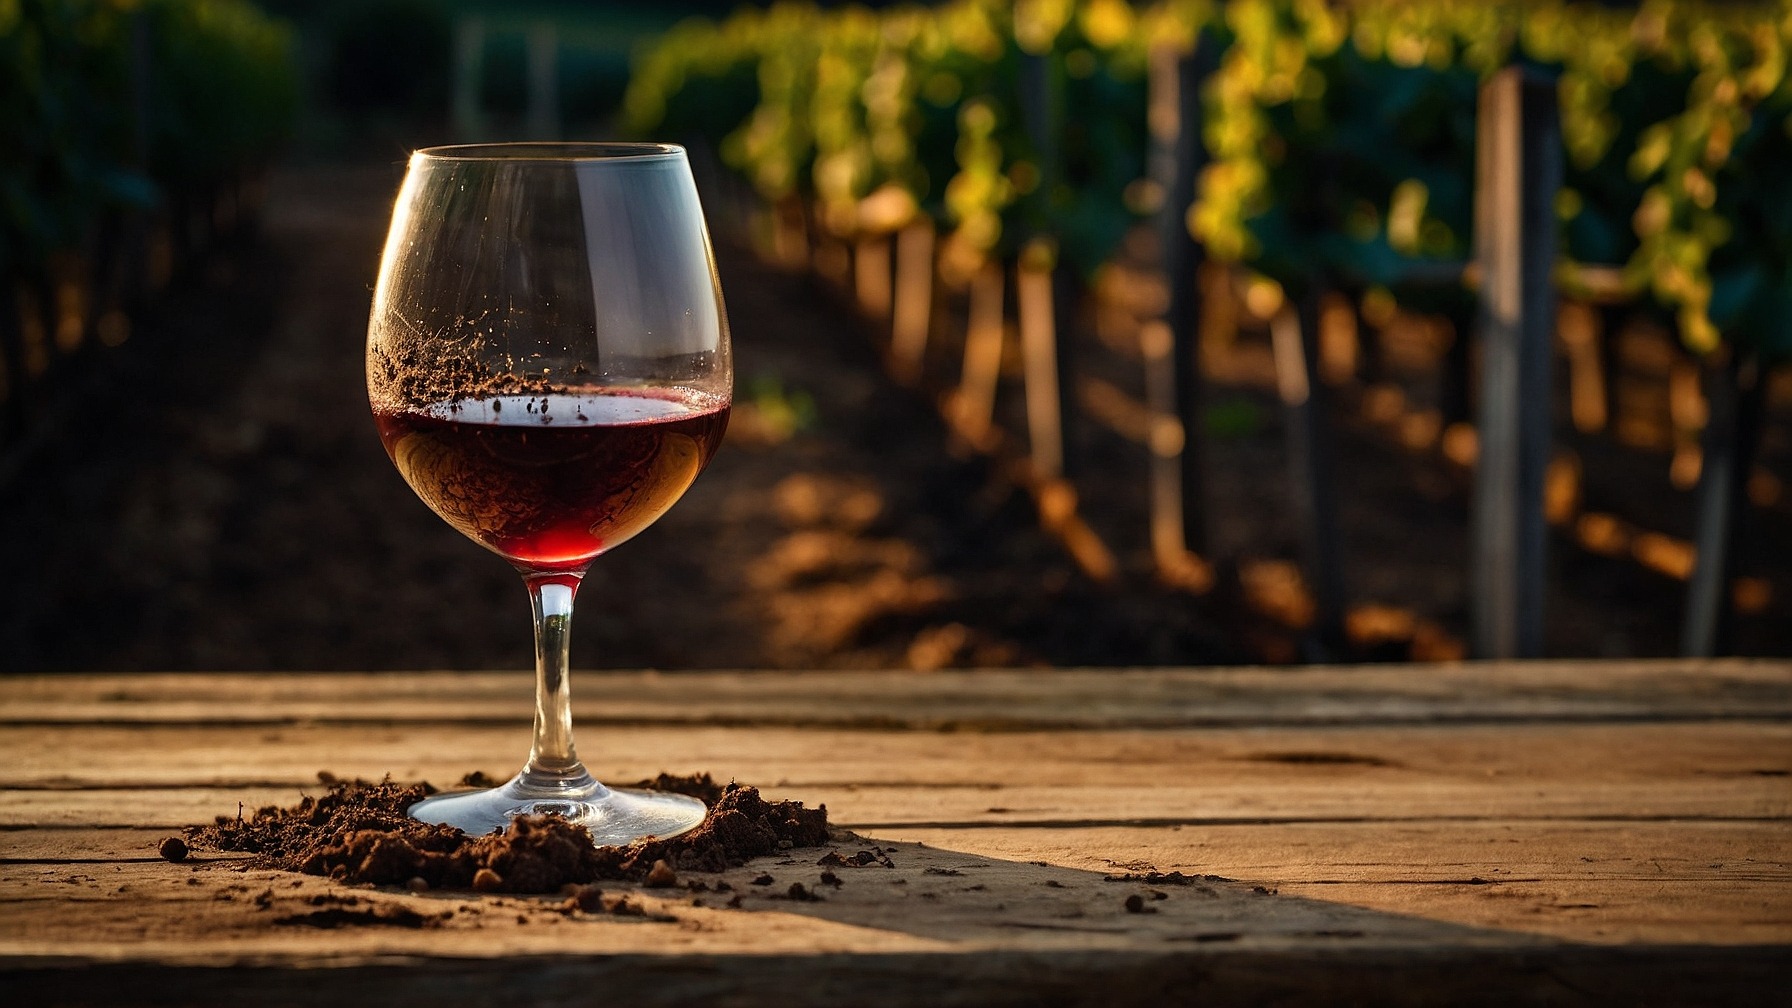 The Soul of Soil in Four Exceptional Wines